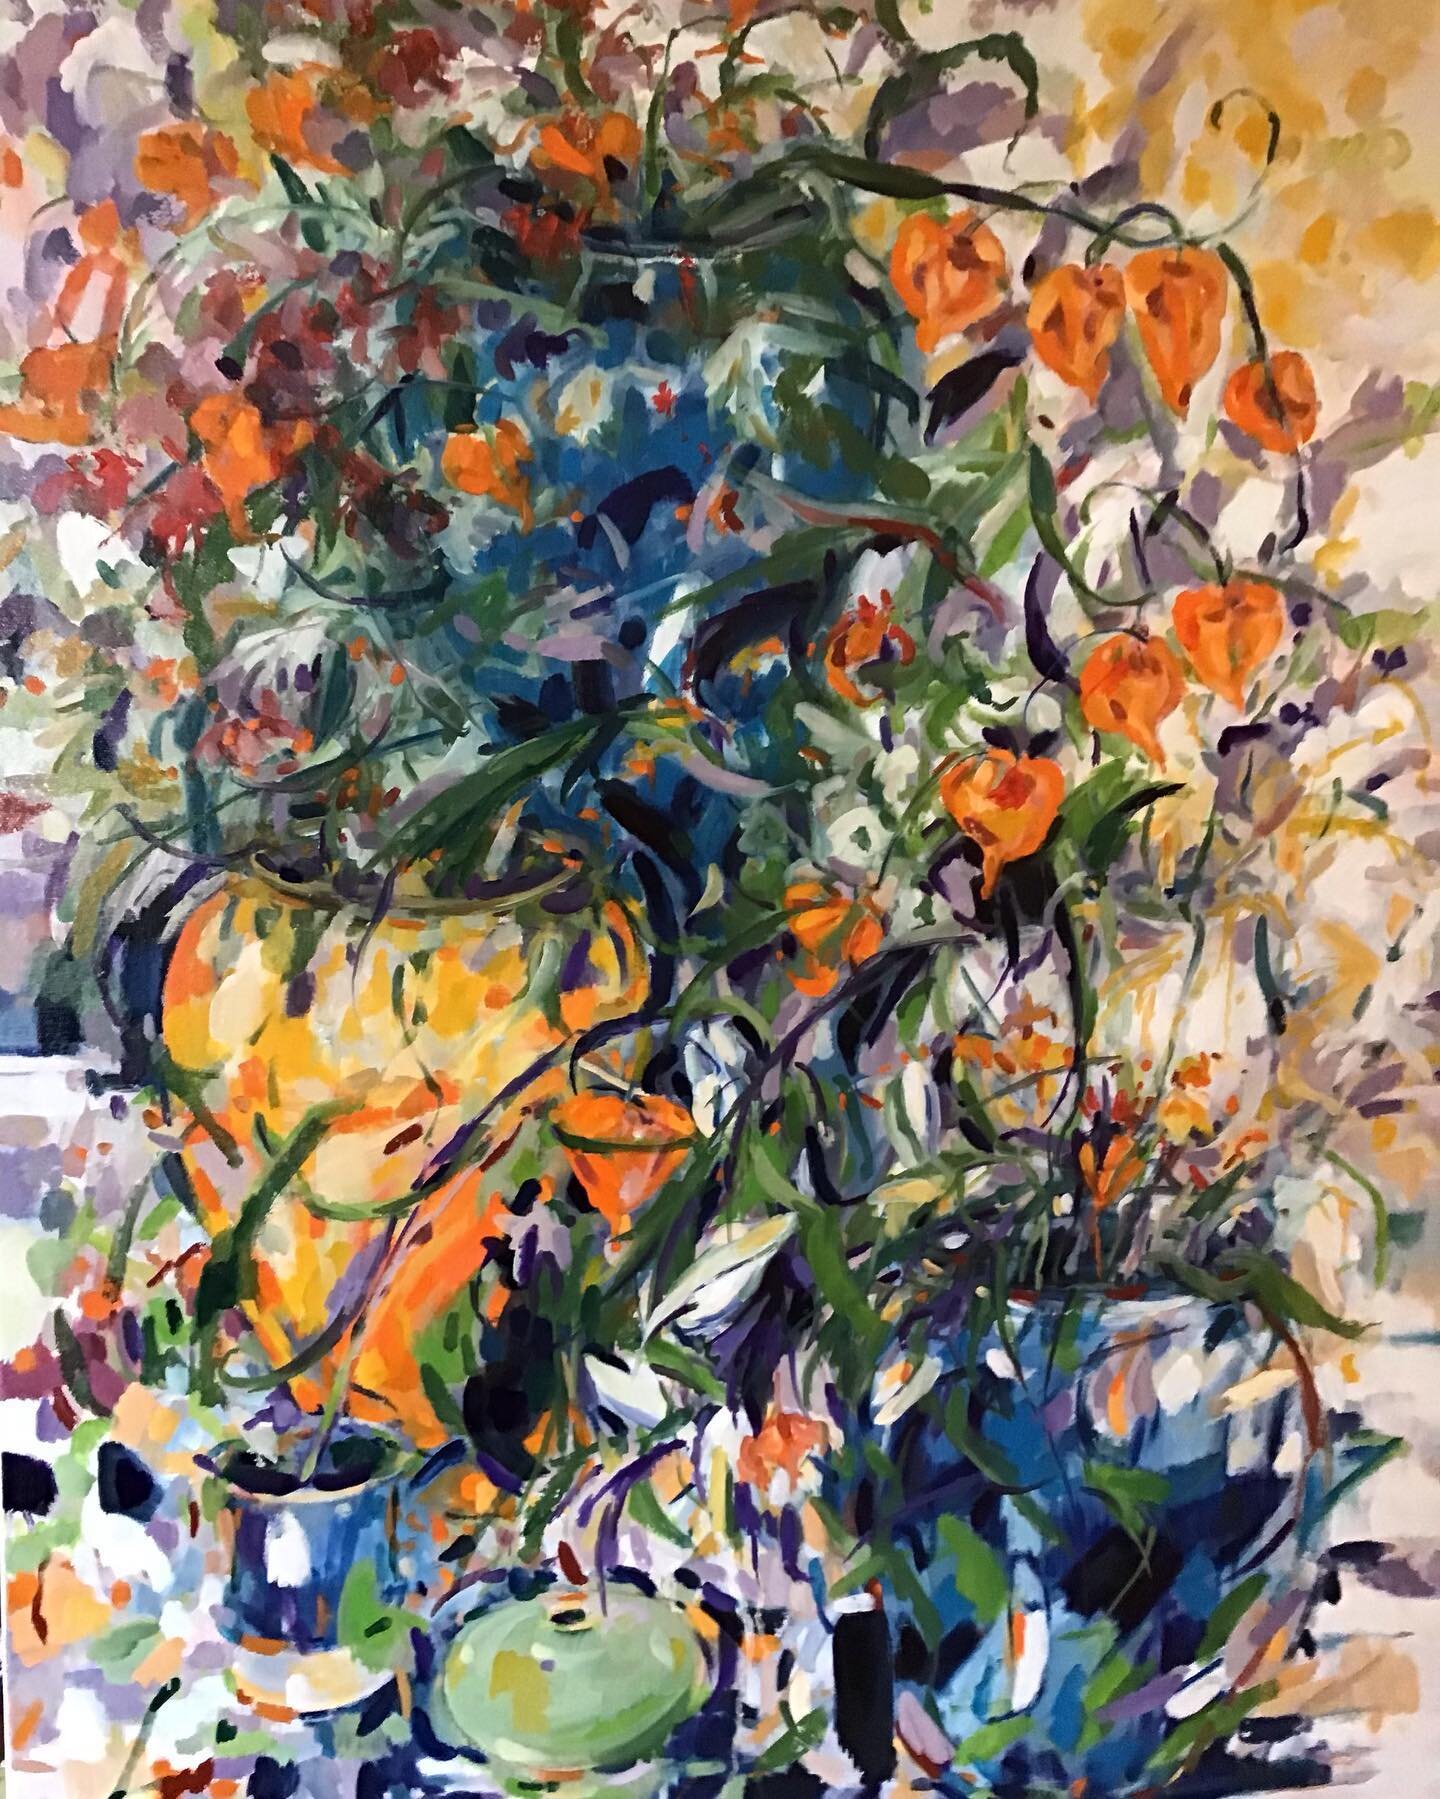 &lsquo;Chinese Lanterns&rsquo; oil on canvas 76 x 102 cm